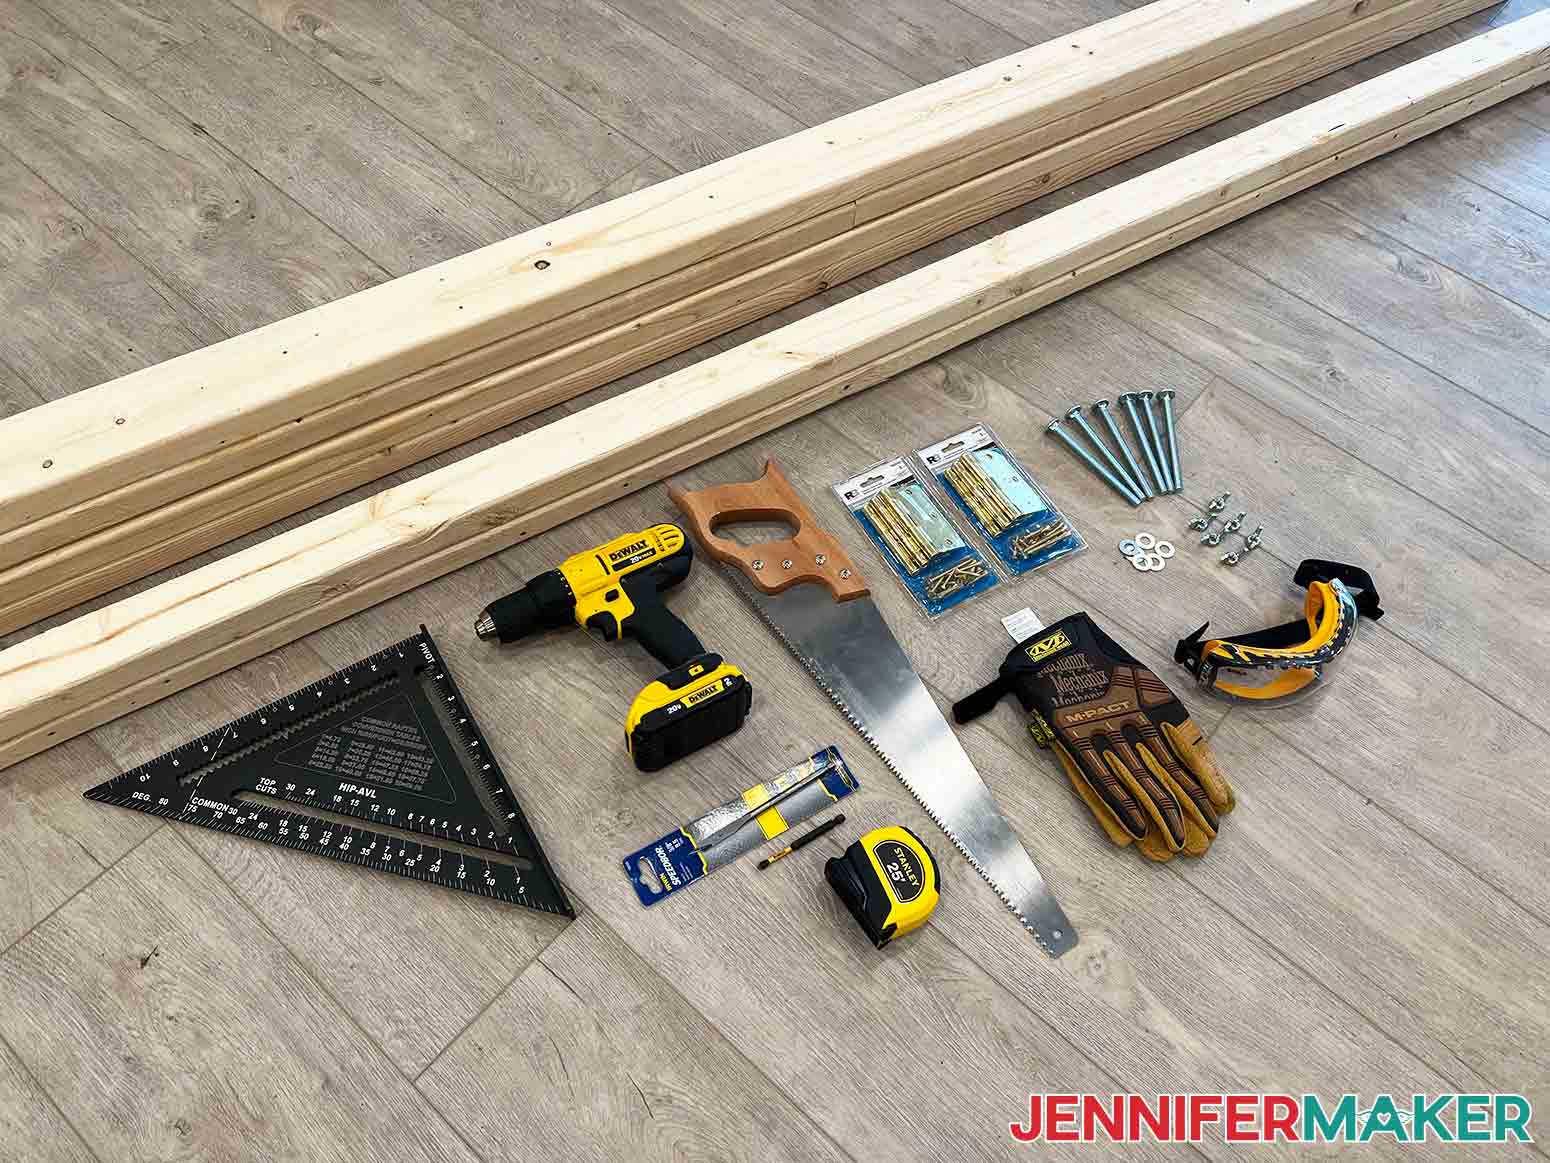 Supplies and tools to make a DIY backdrop stand from wood, including square, drill, saw, tape measure, gloves, eye protection, bolts, washers, wingnuts